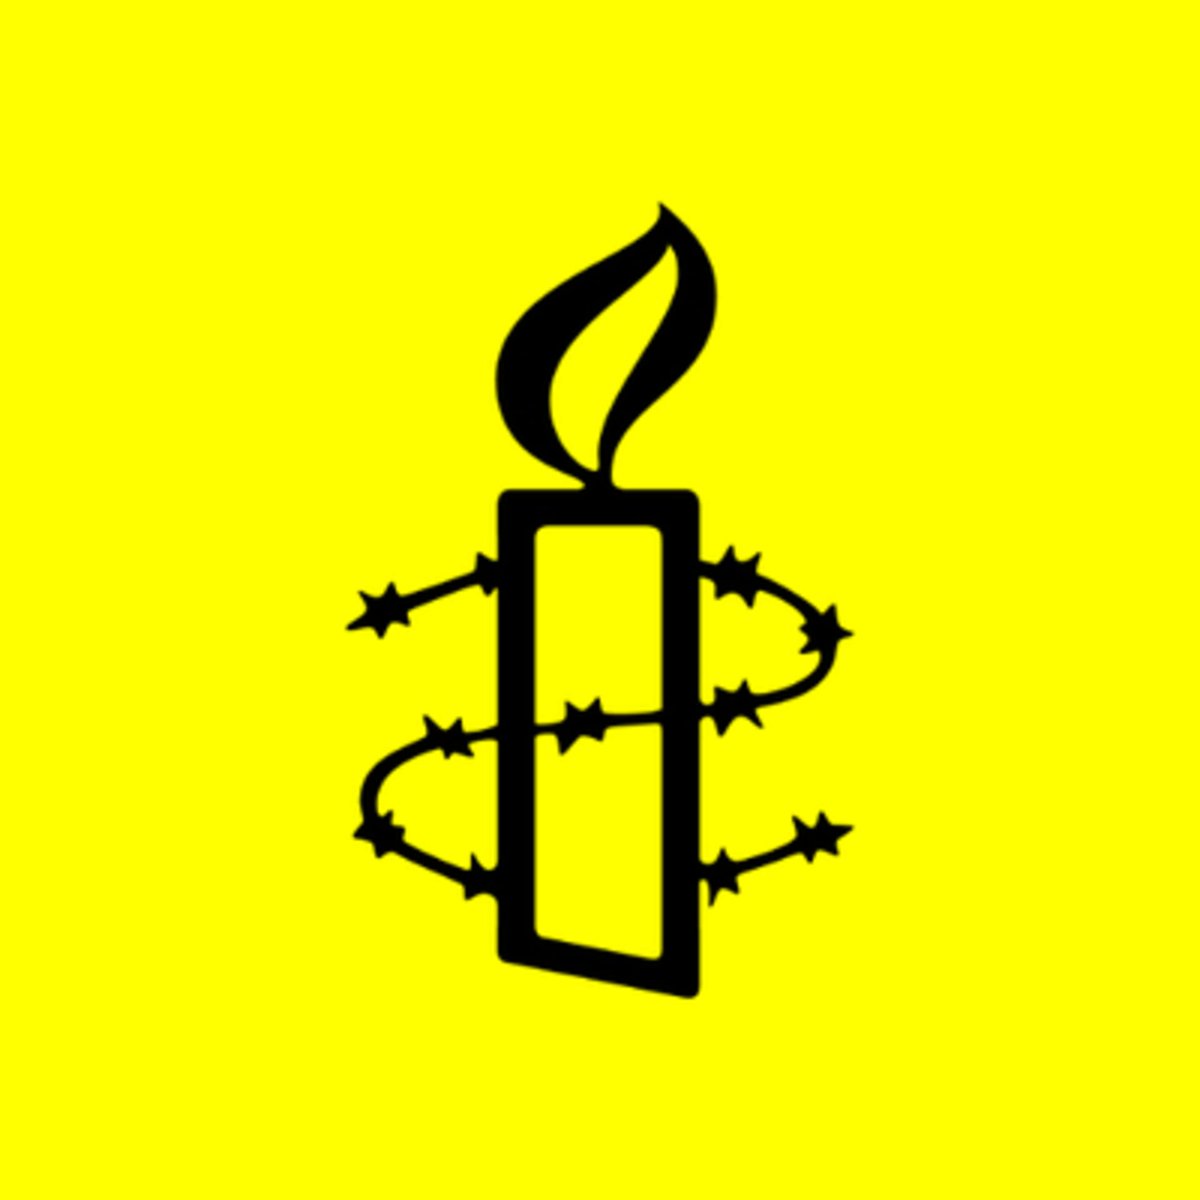  @AmnestyUK signed our open letter against the Nordic ModelAmnesty International is the world's largest grassroots human rights organisation. Read the letter here  https://decrimnow.org.uk/open-letter-on-the-nordic-model/  #notonordicmodel